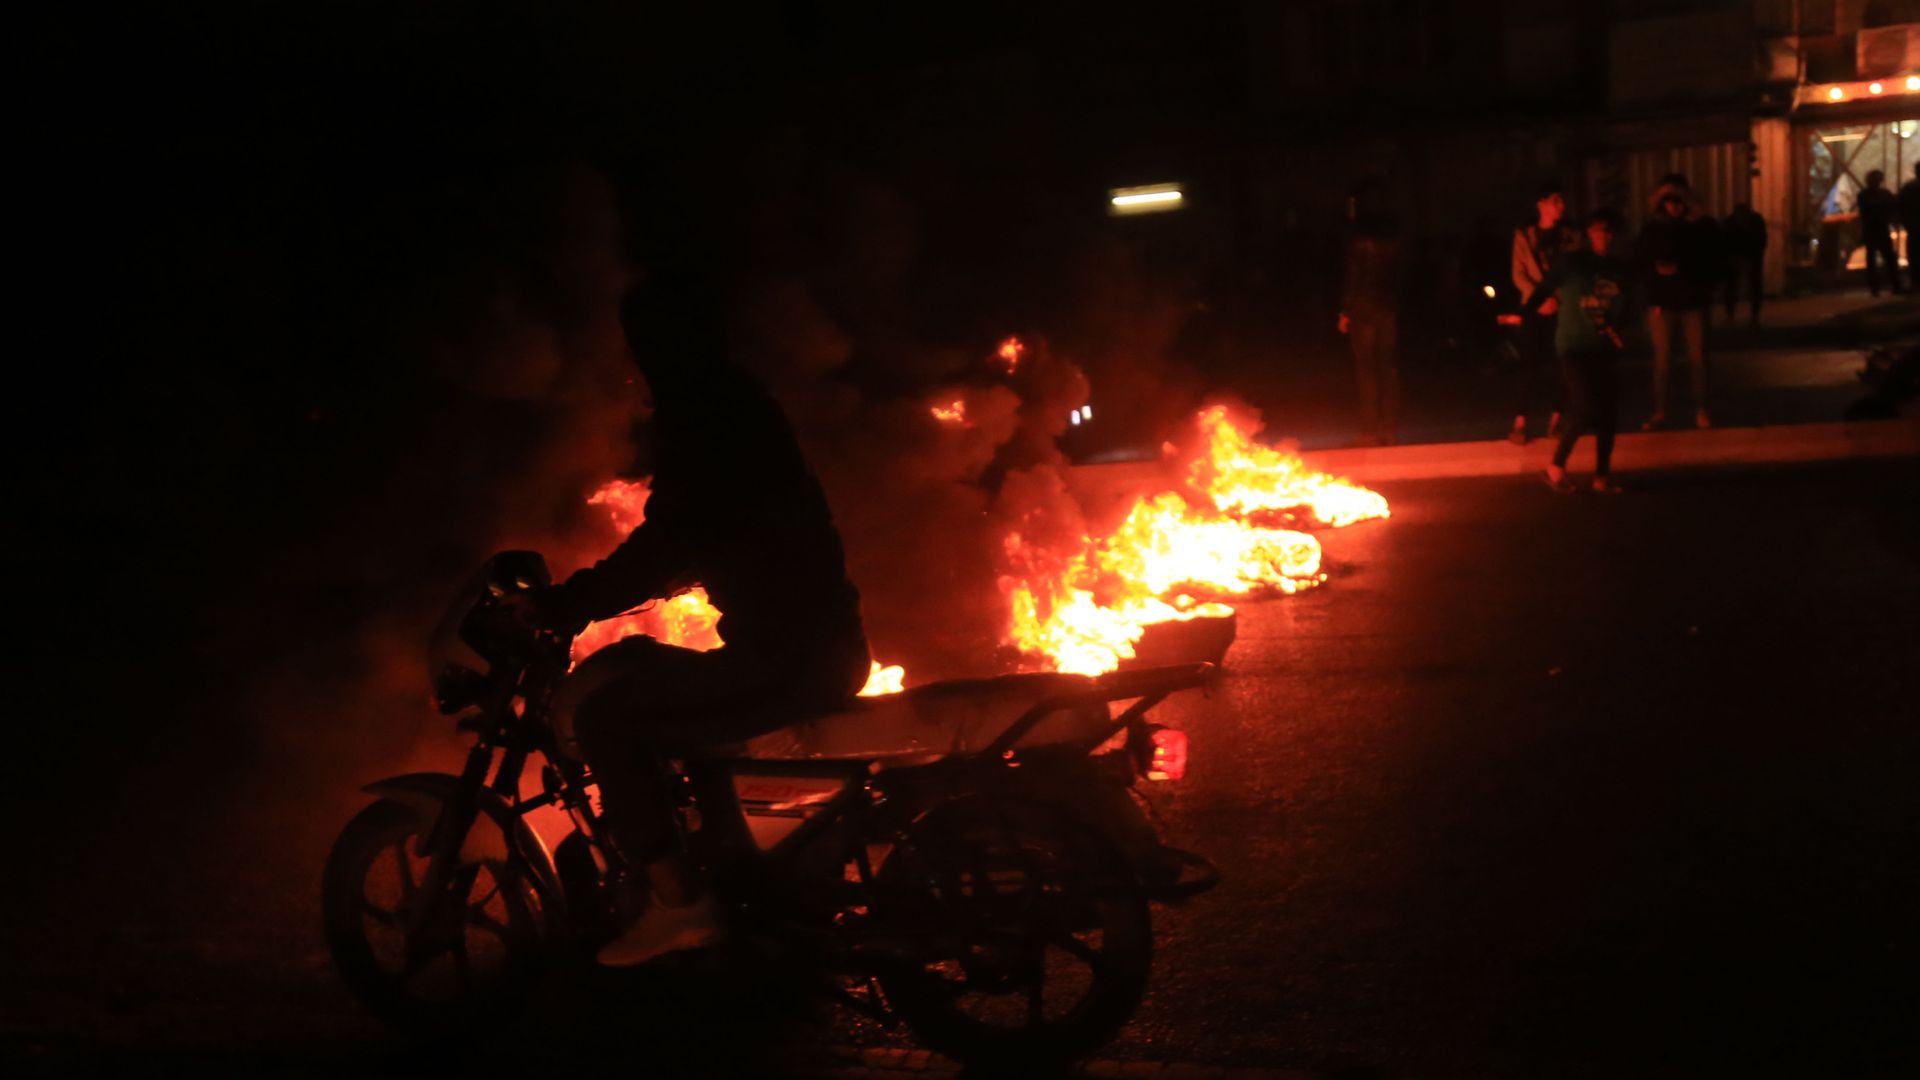 A person riding a bike with a protest in the dark and fire in the background.